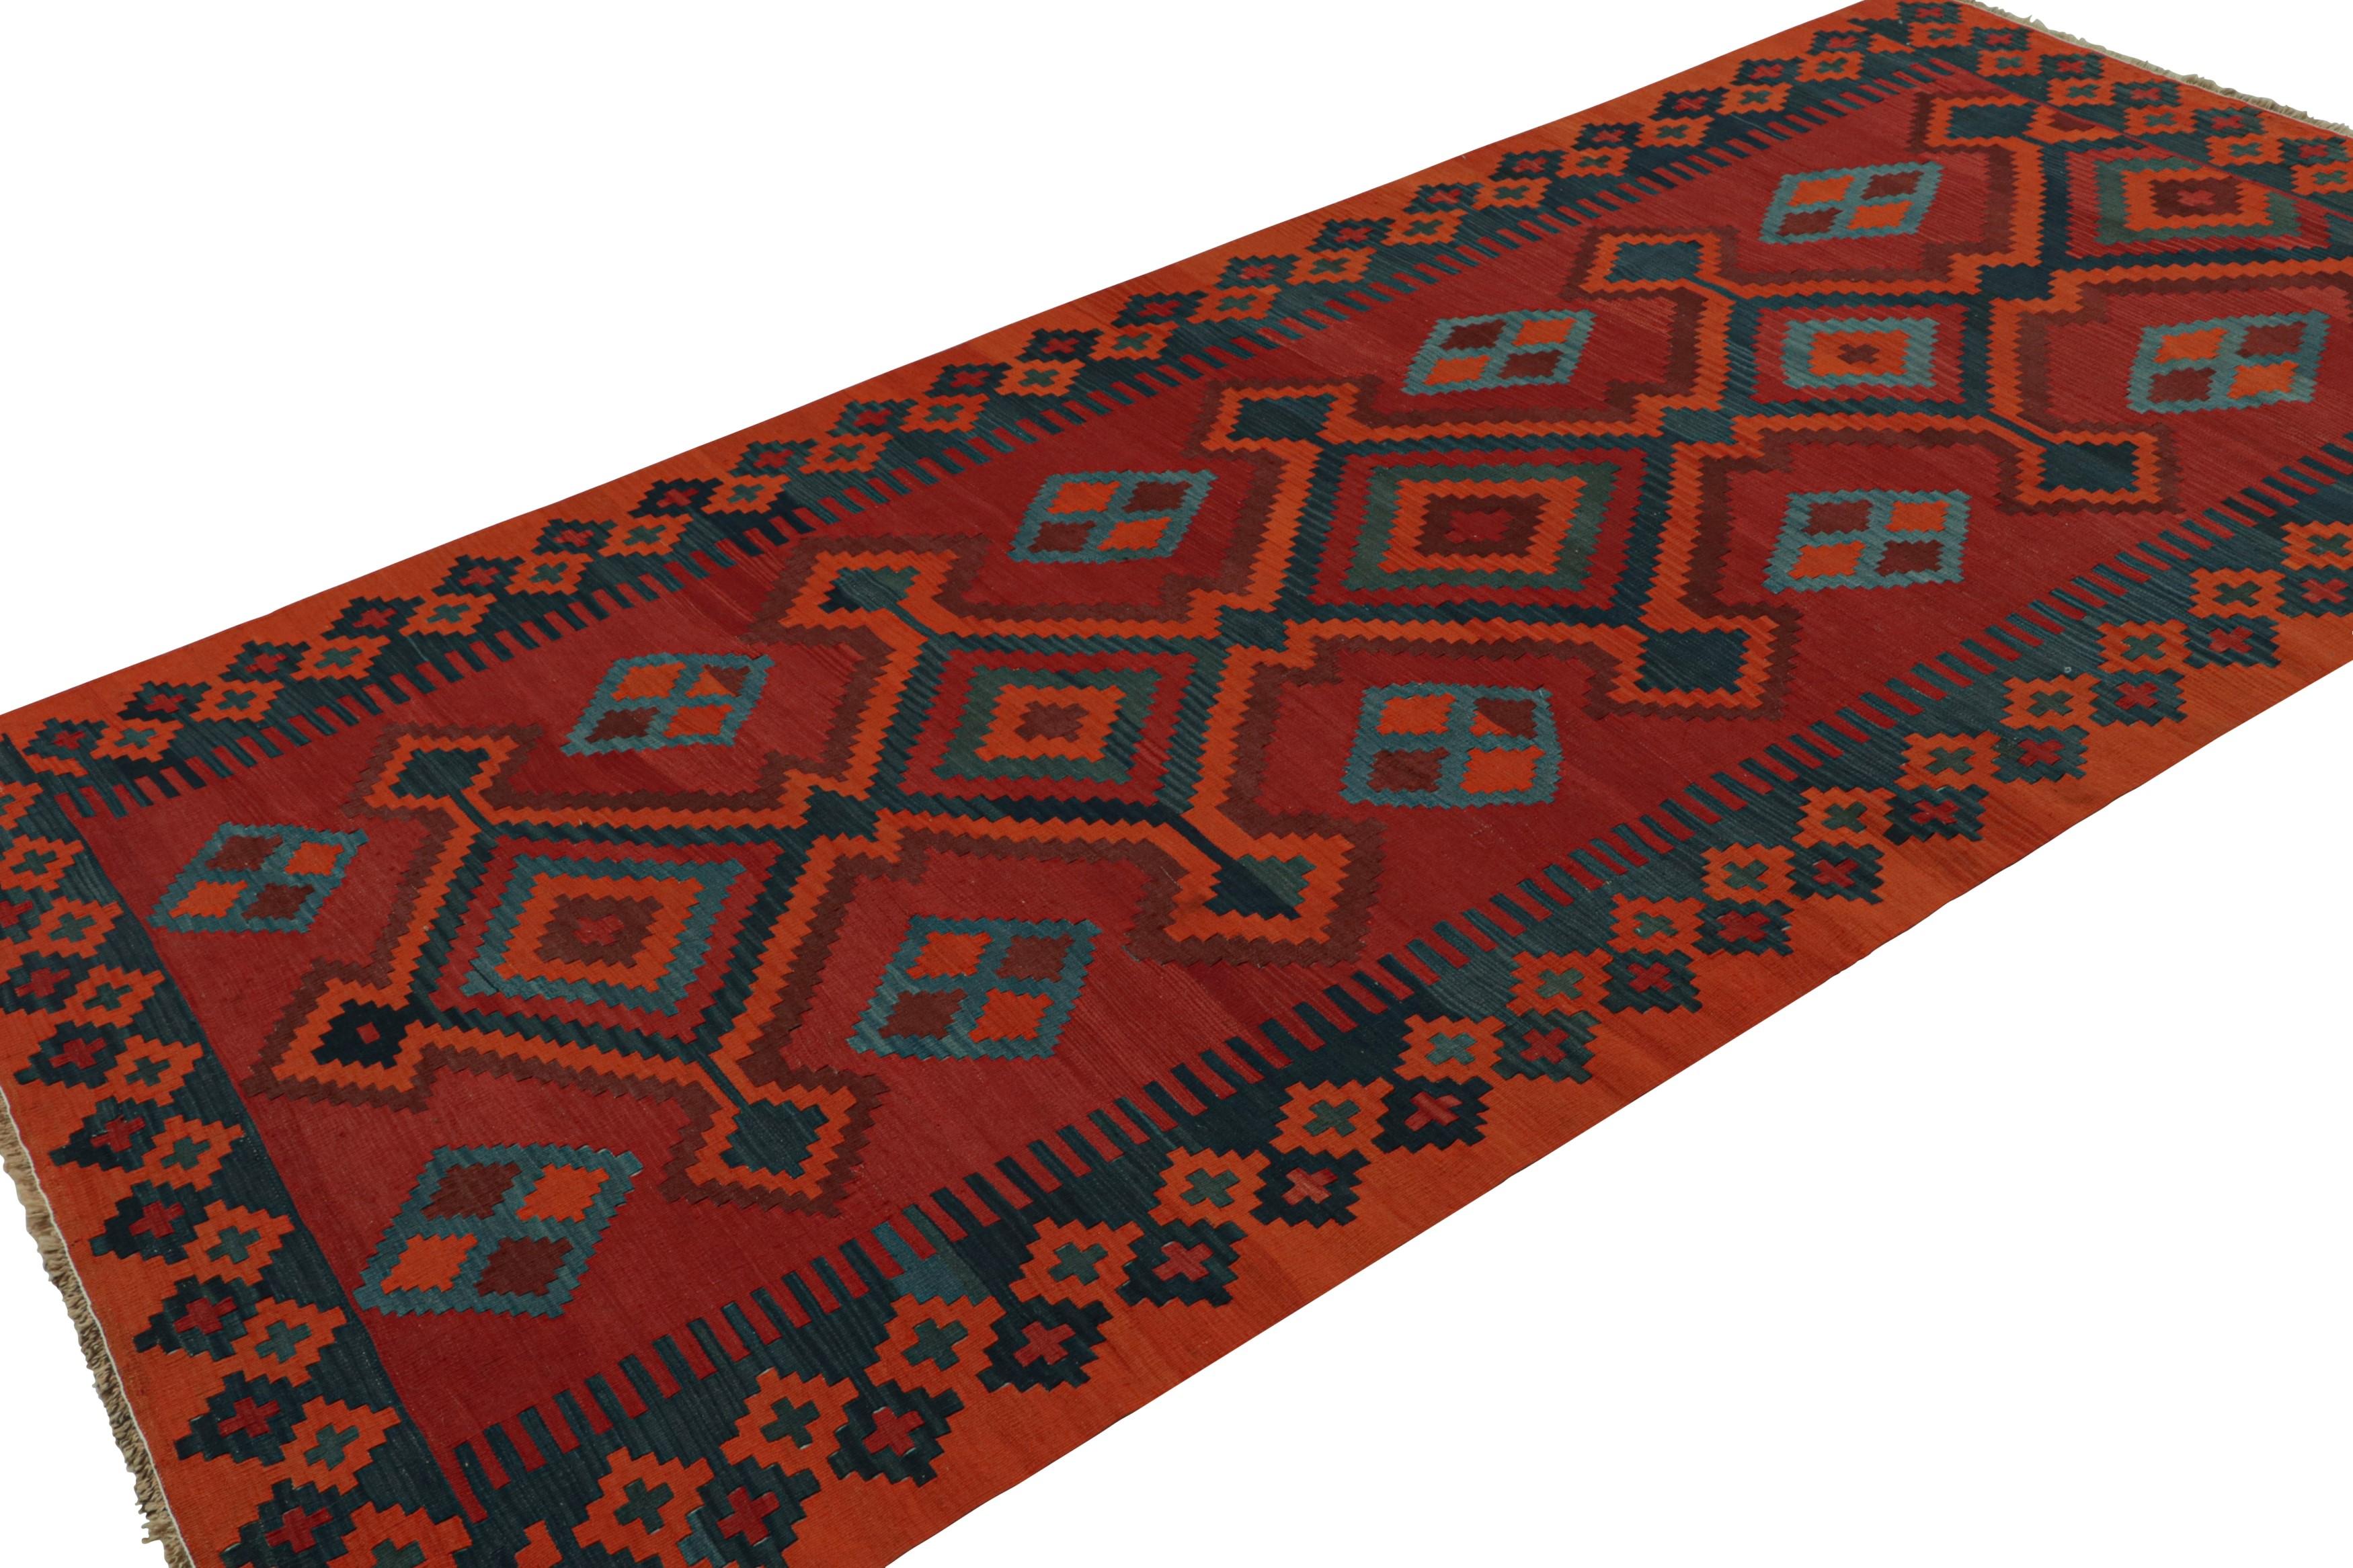 Handwoven in wool, circa 1950-1960, this 5x11 vintage tribal Afghan kilim rug features vibrant medallions and geometric patterns in blue, orange and black, on a red field. 

On the Design: 

Admirers of Afghan craft will appreciate this special